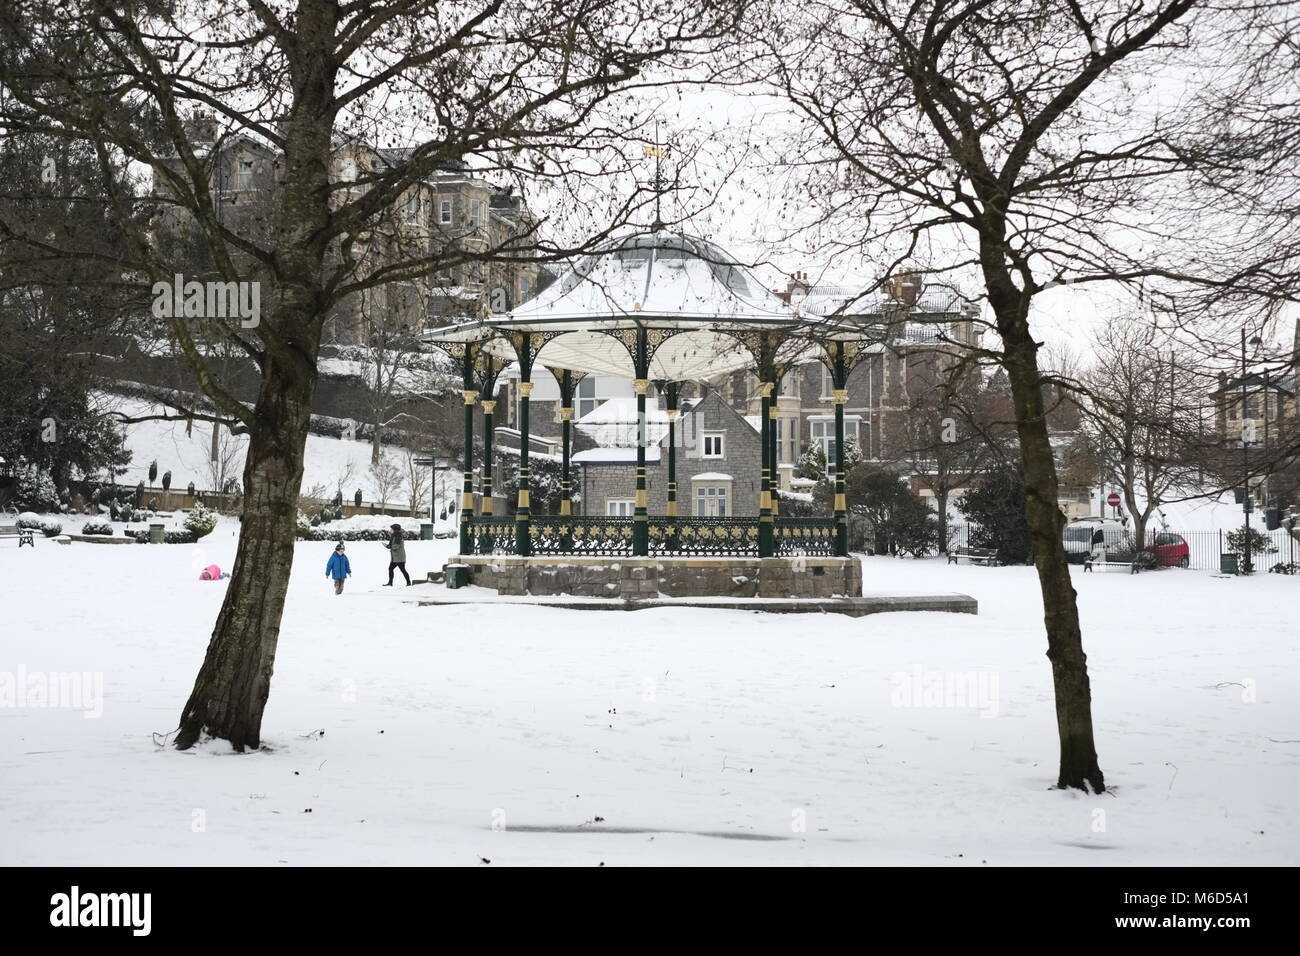 Grove Park.Weston super mare. UK. 2nd March 2018. children play in snow by a band stand. Credit: Alamy Live News Stock Photo